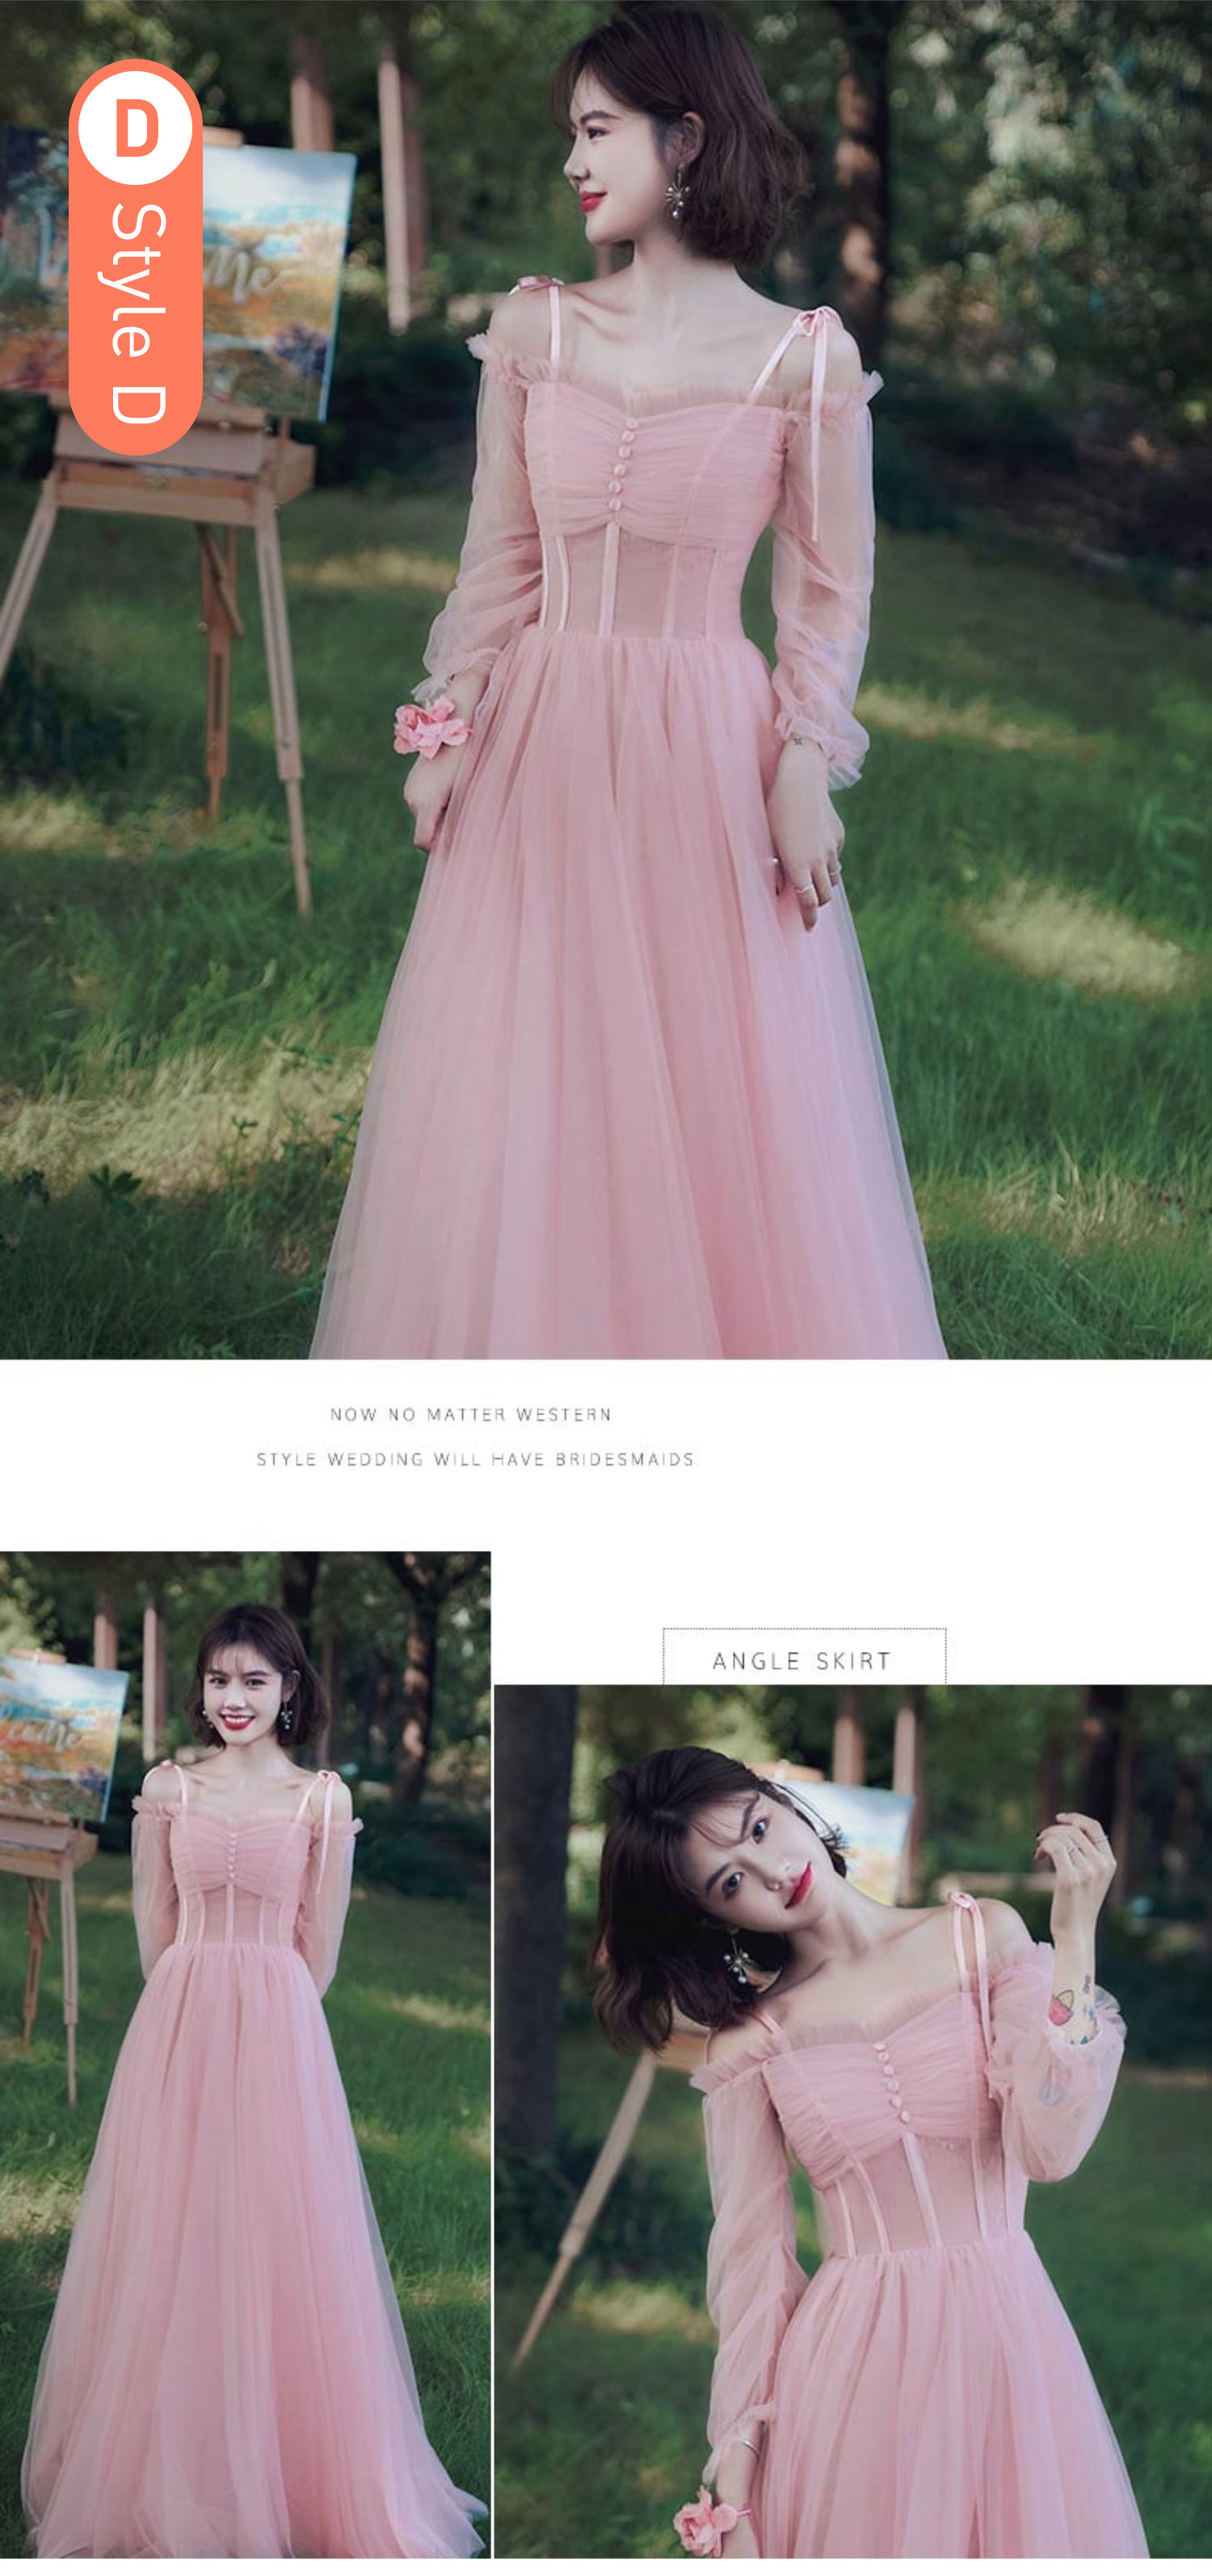 Feminine-Sweet-Pink-Tulle-Bridesmaid-Dress-Prom-Party-Ball-Gown21